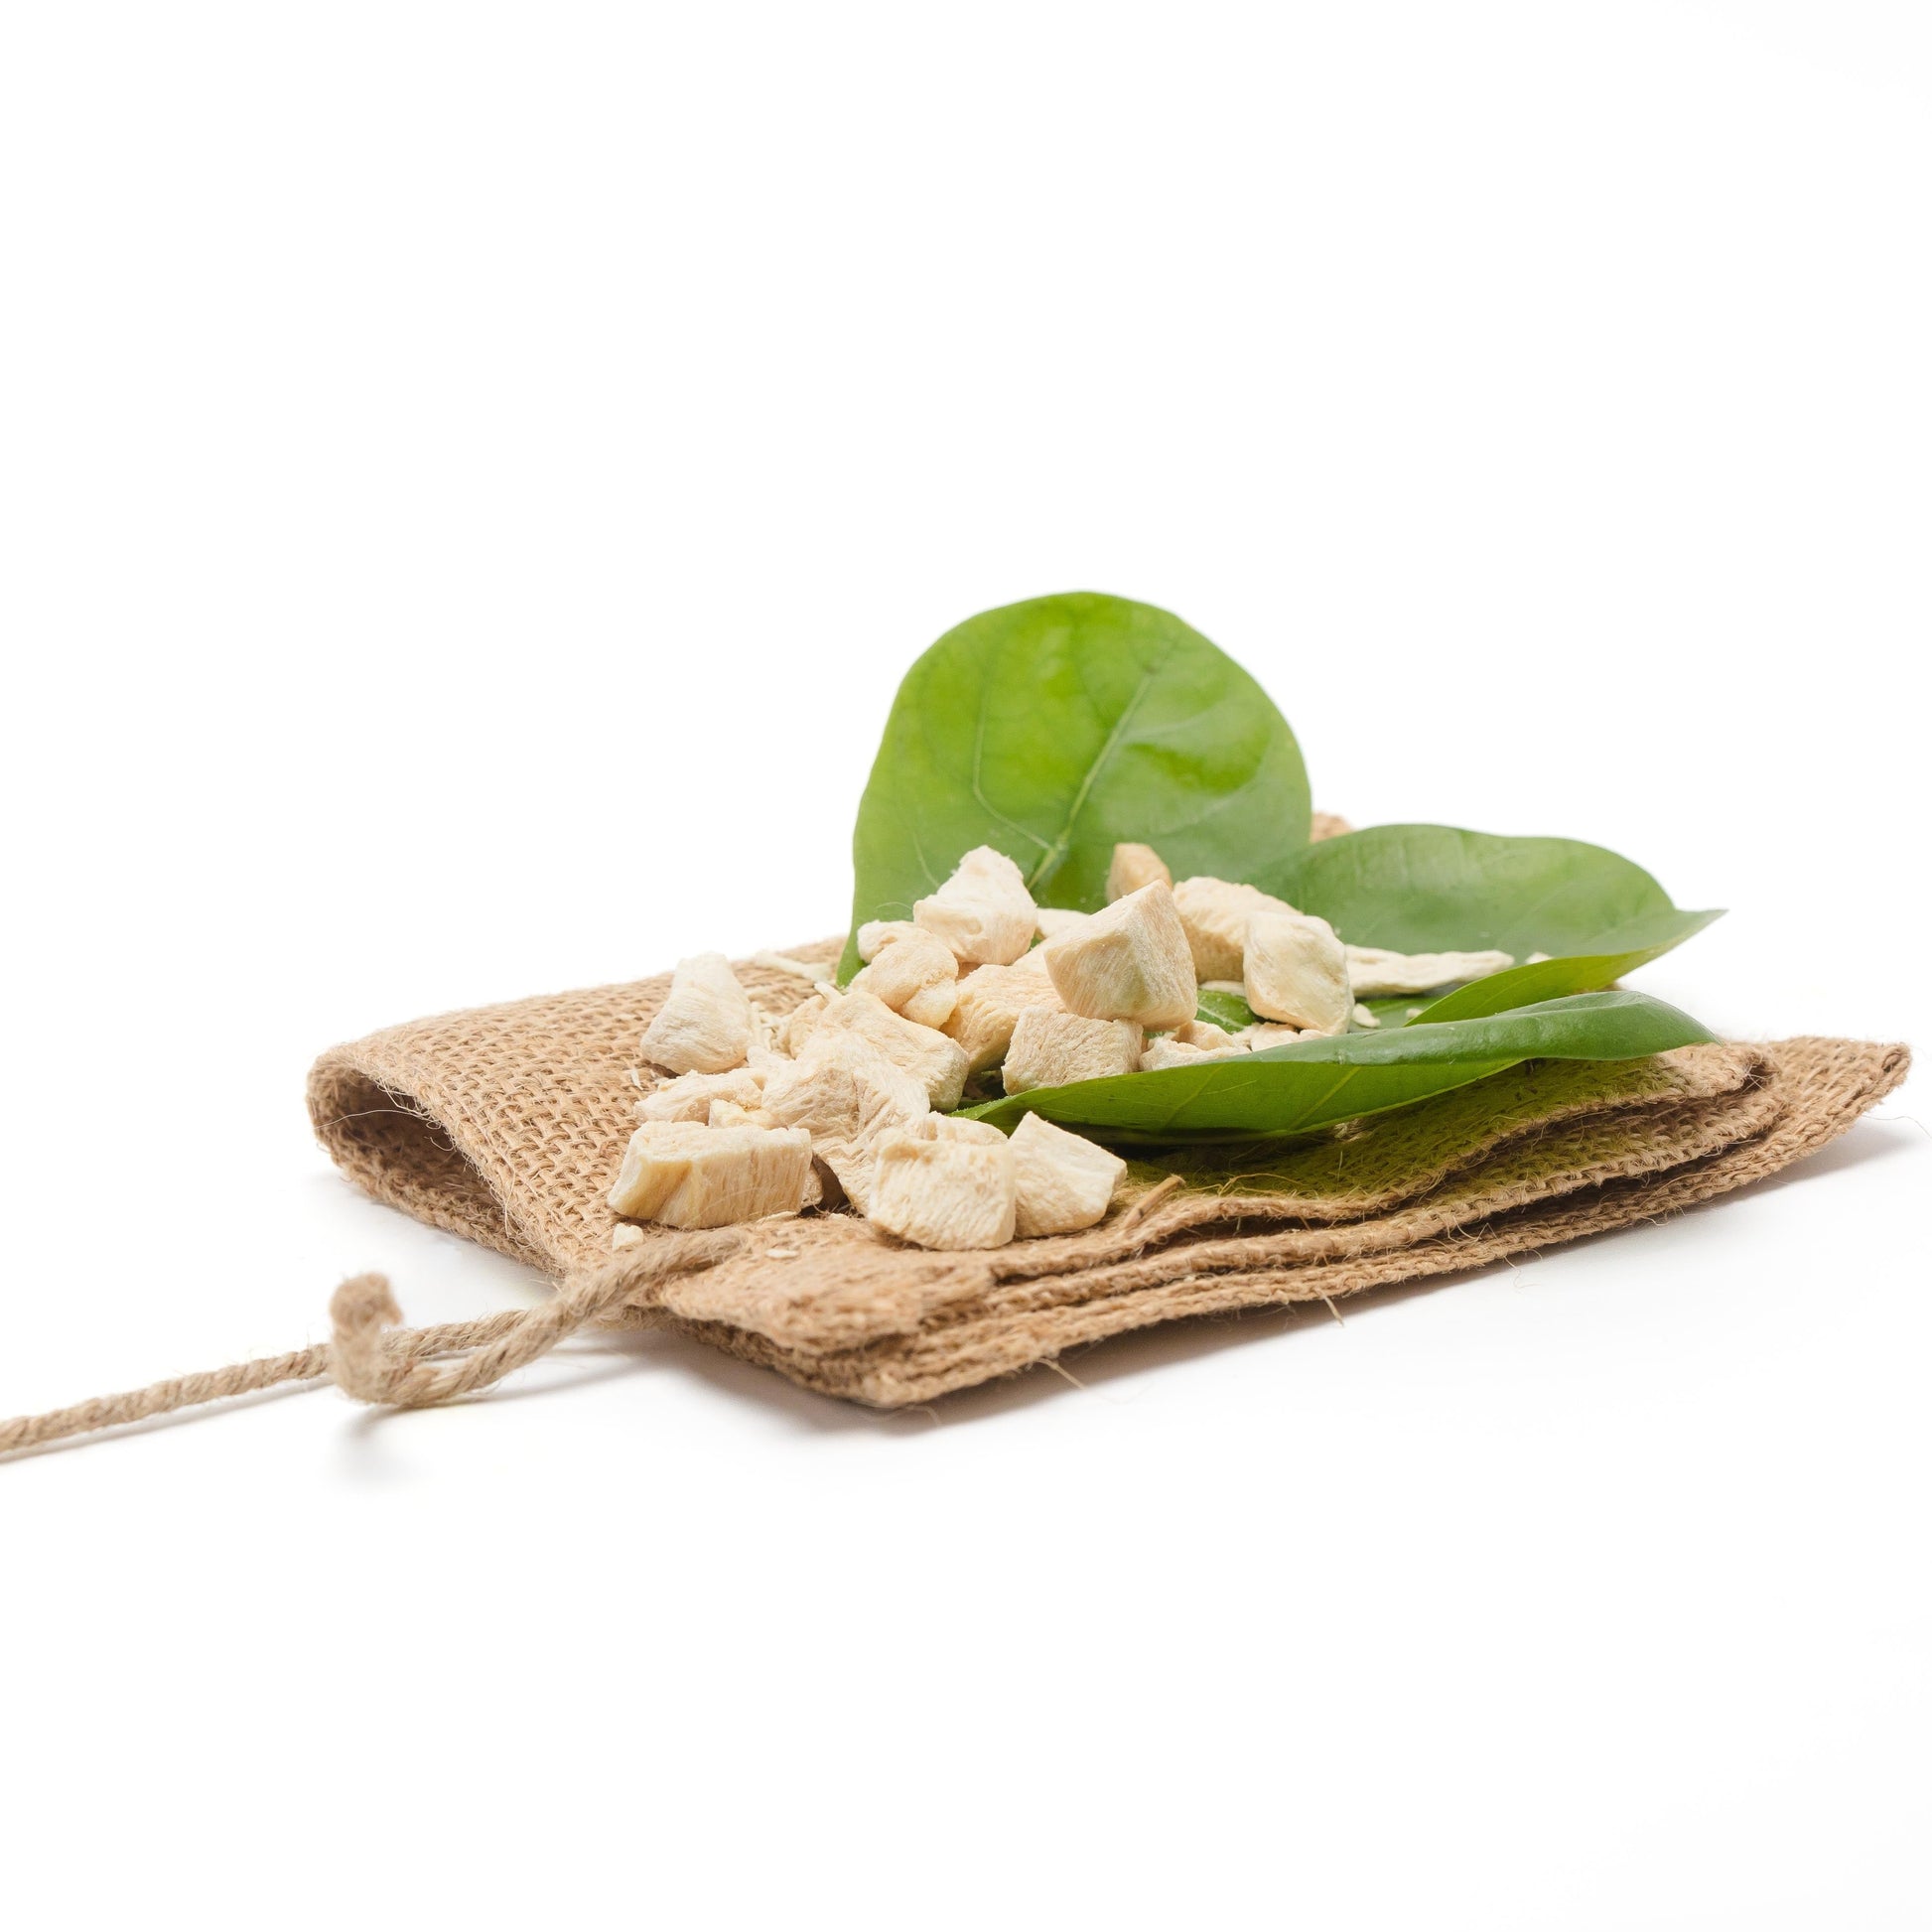 Freeze-Dried Chicken Breast 1oz from Beast Feast on a white background.